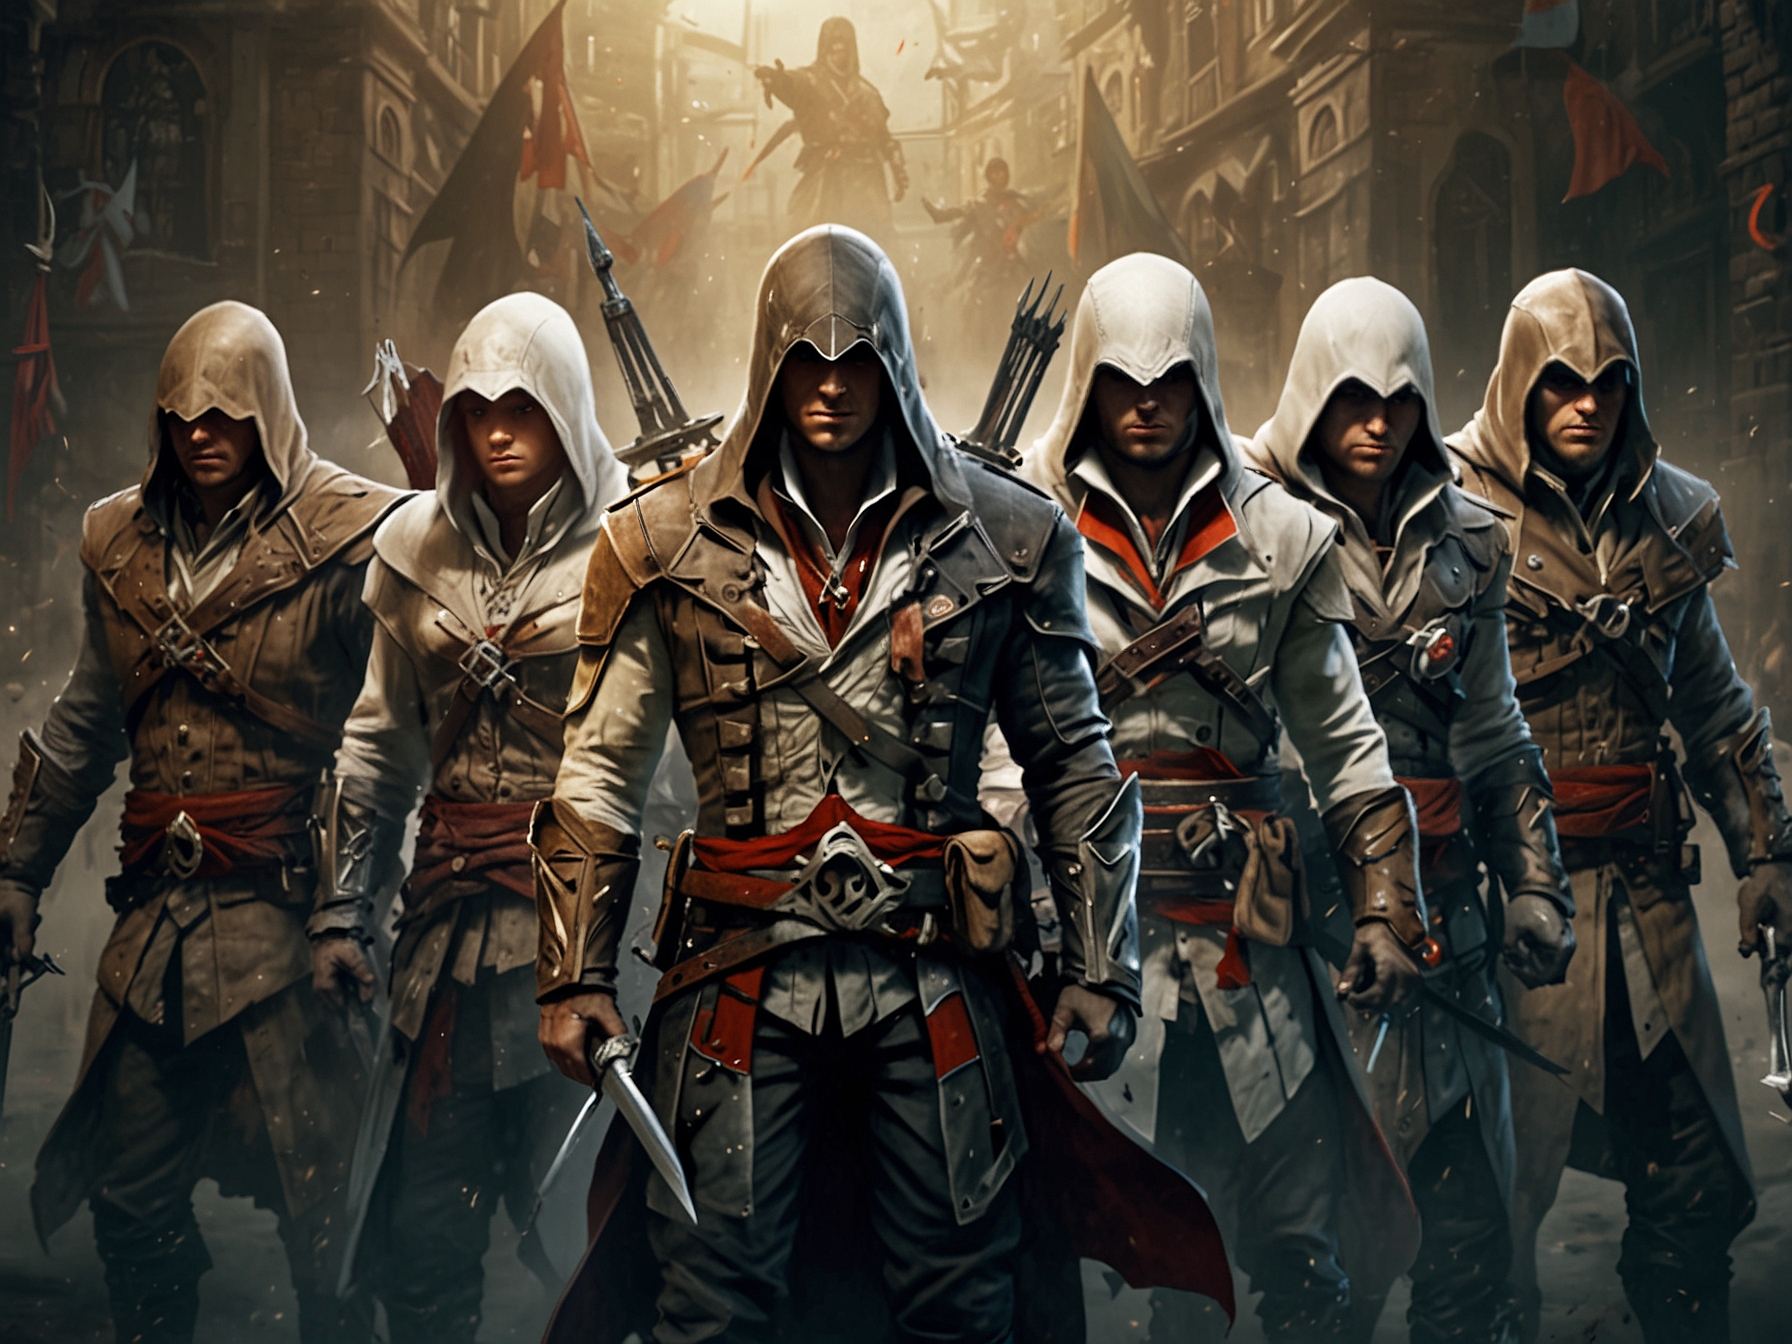 A high-definition image of various Assassin’s Creed protagonists standing together, each representing different historical periods and locations, highlighting the diversity of the franchise.